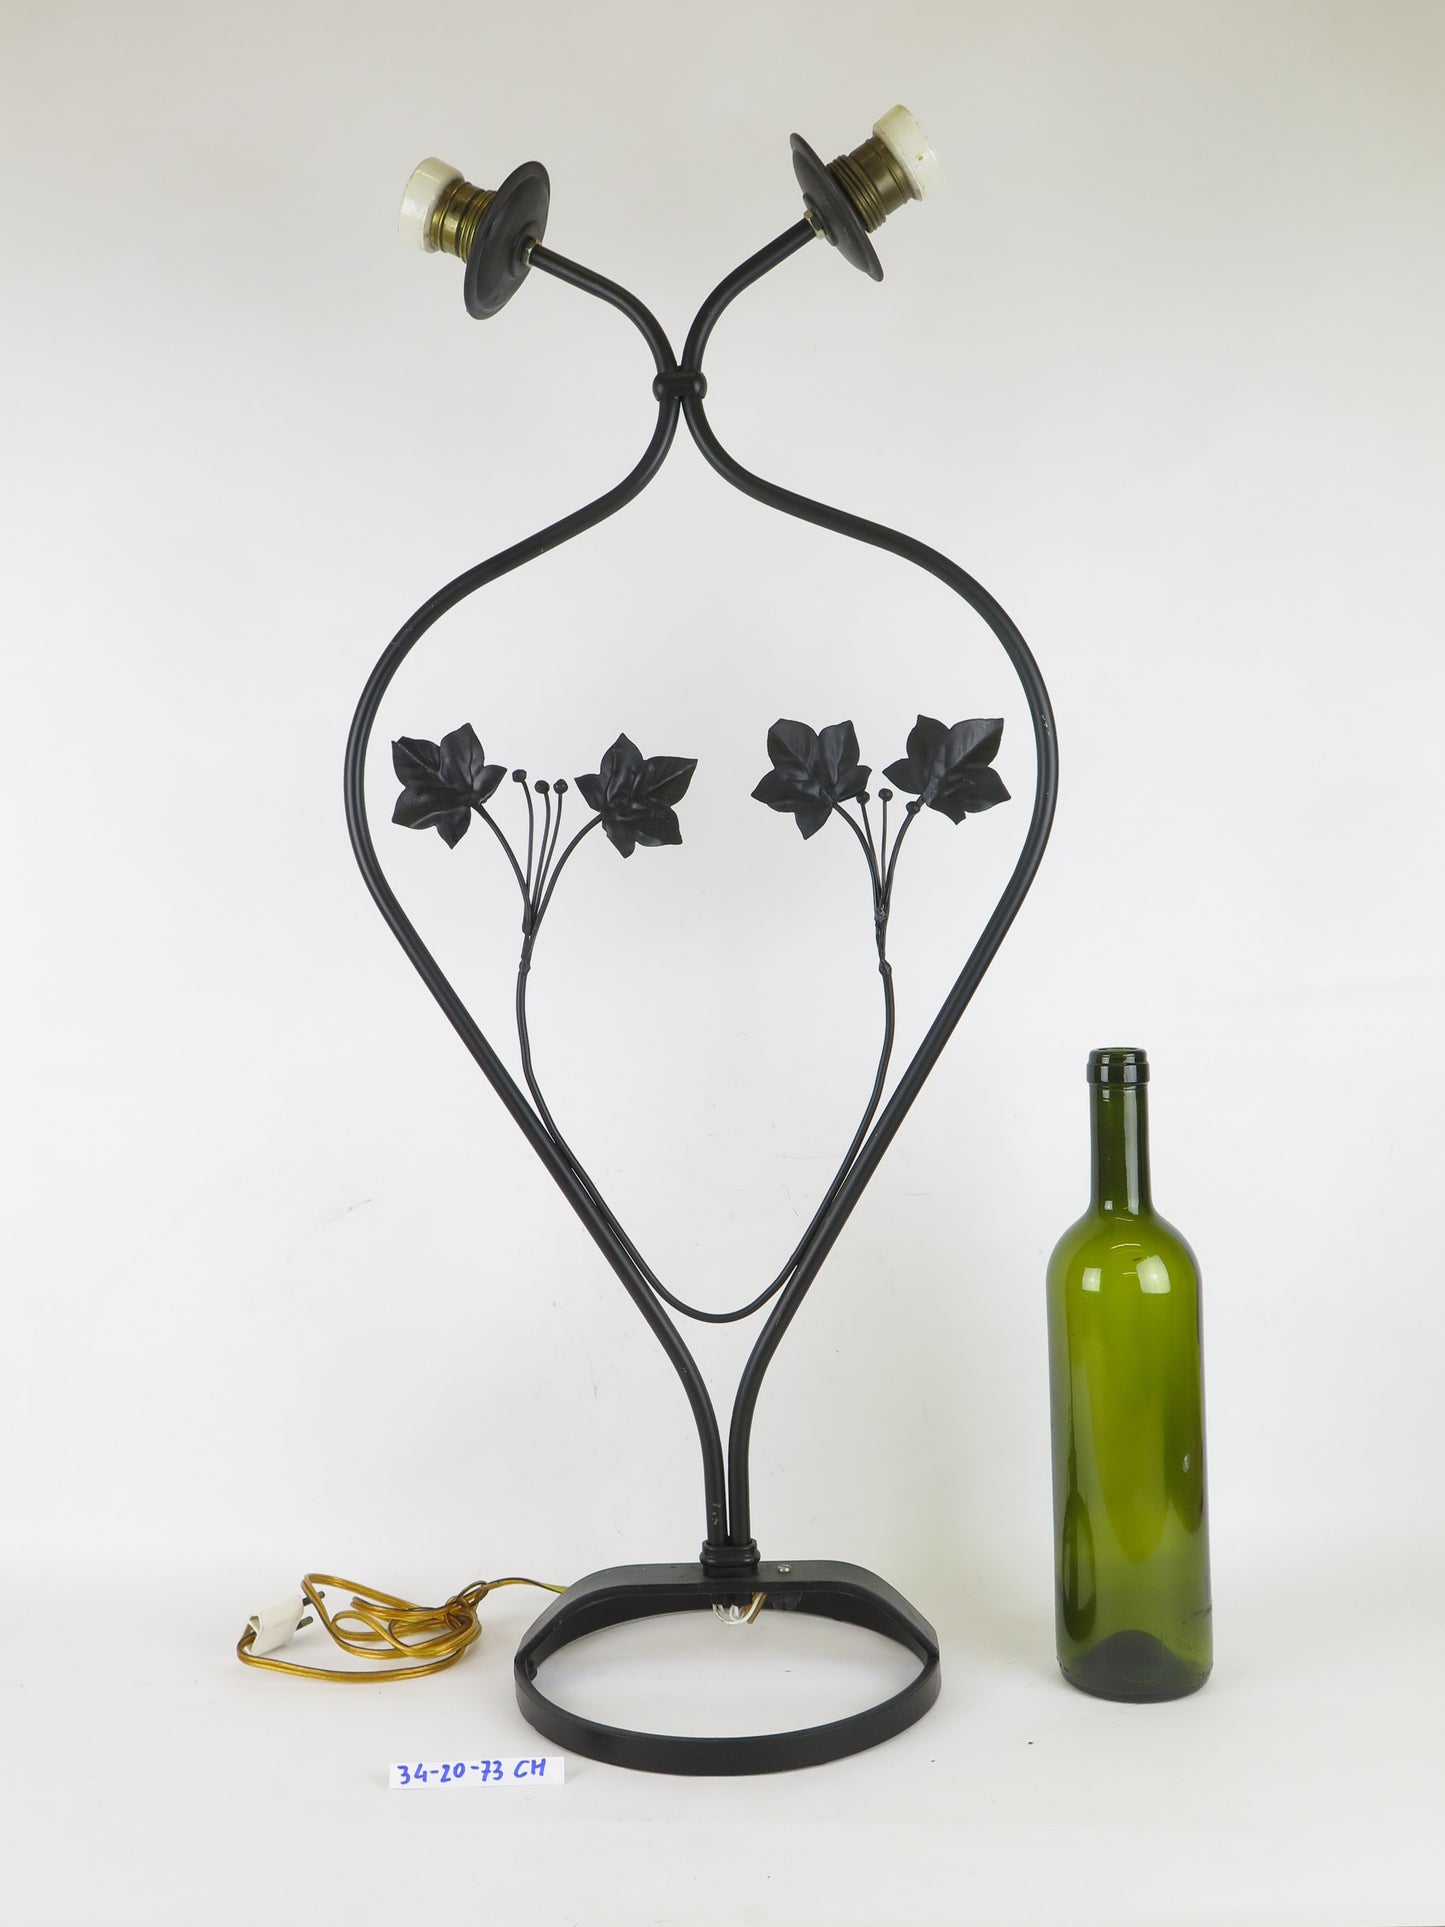 WROUGHT IRON LIVING ROOM READING LAMP WITH LEAVES DECORATION VINTAGE DESIGN CH